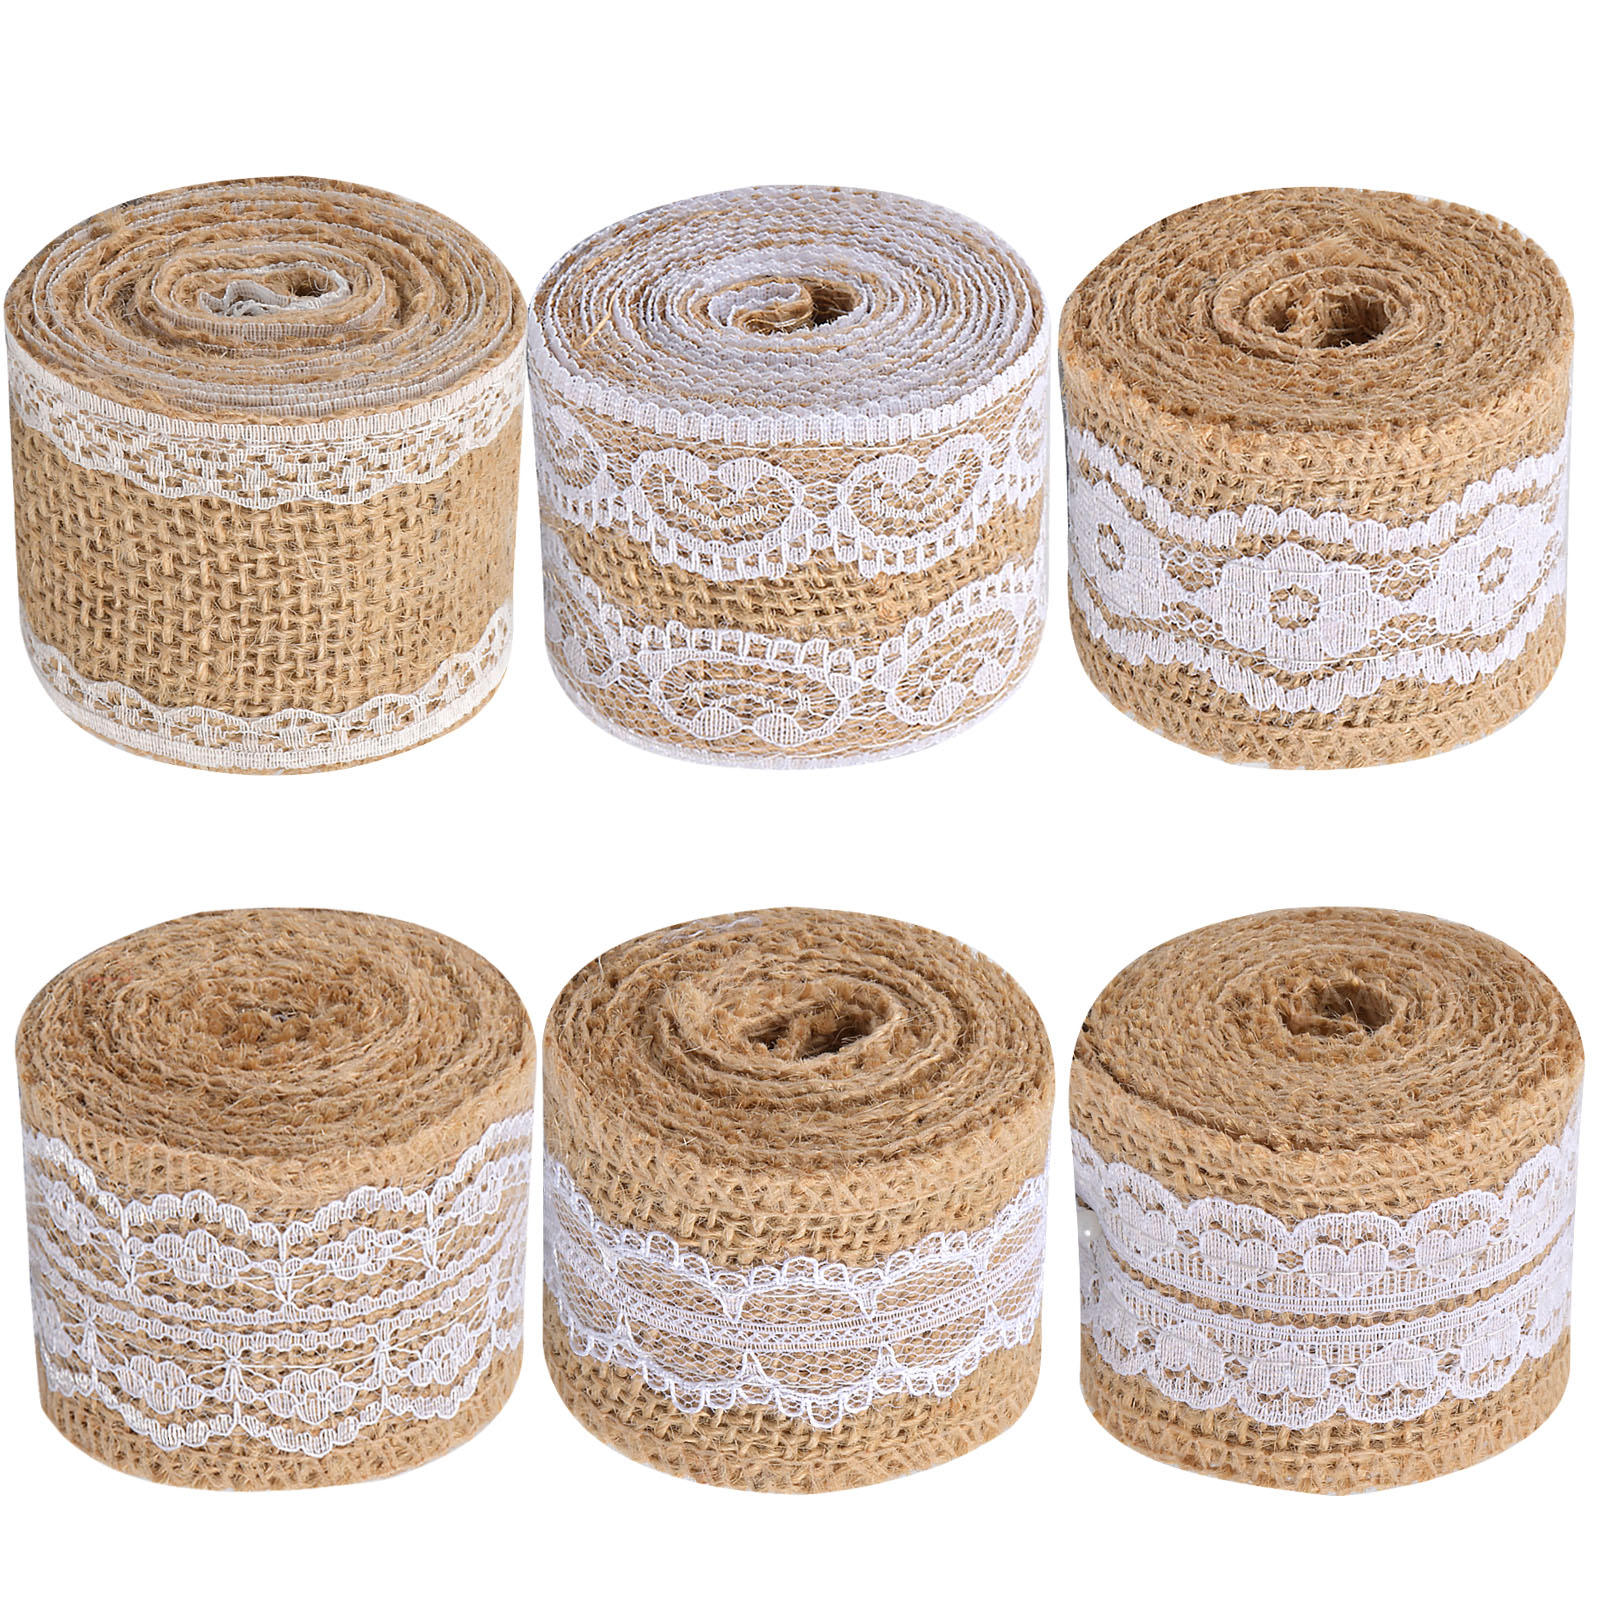 10m Natural Jute Burlap Hessian Lace Ribbon Roll With White Laces Perfect  For Vintage Wedding, Party, Christmas Craft Tape And Decorations From  Cat11cat, $8.37